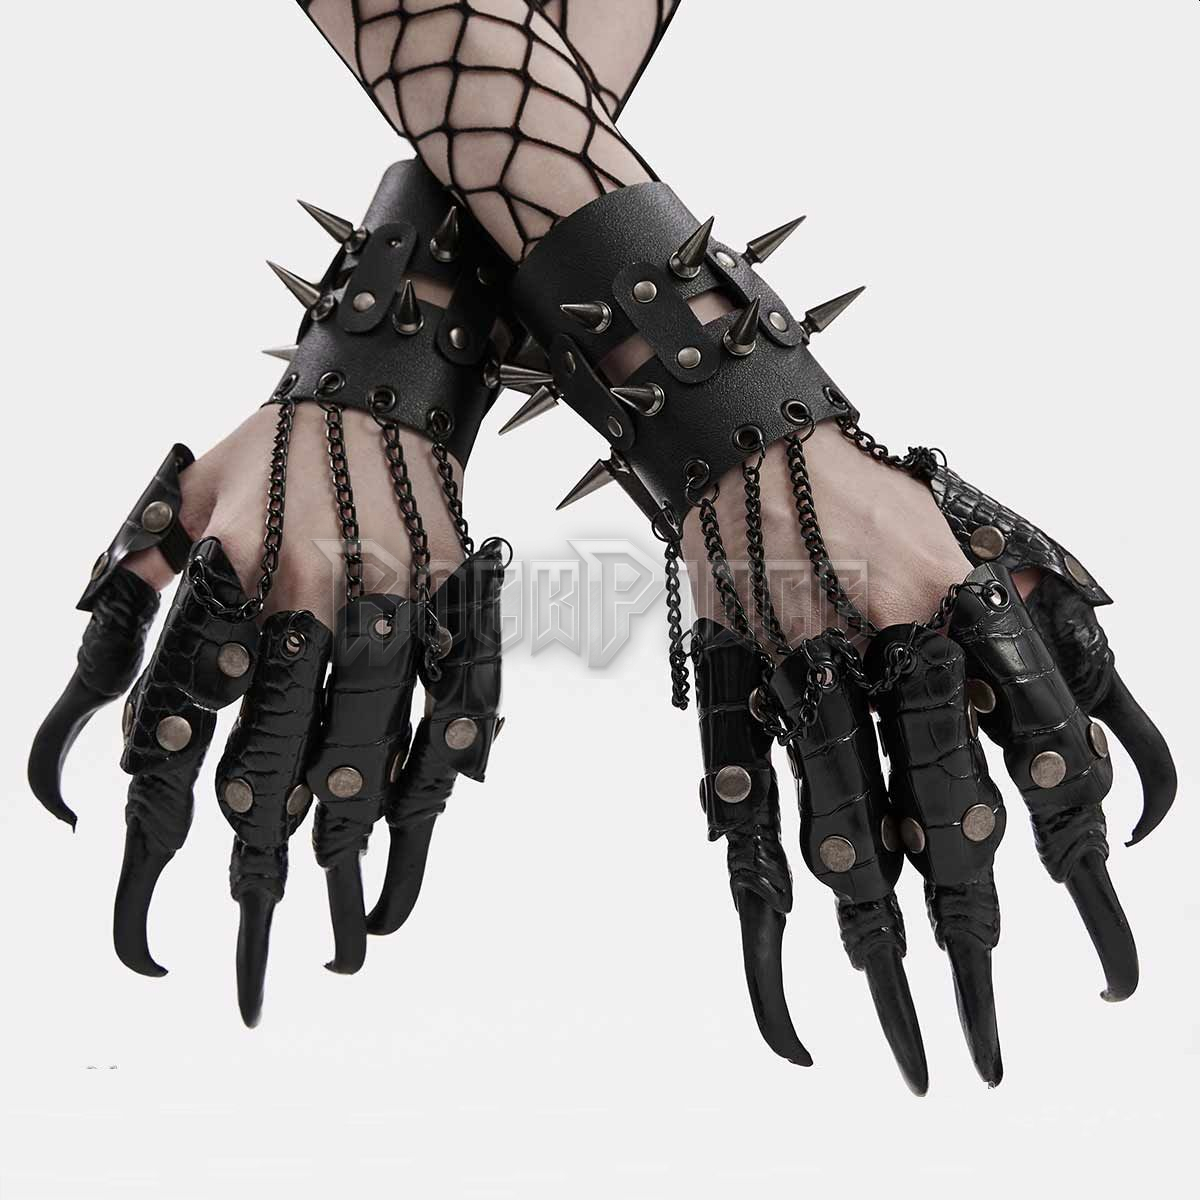 XENA WRISTBANDS WITH CLAWS - WS-595/BK